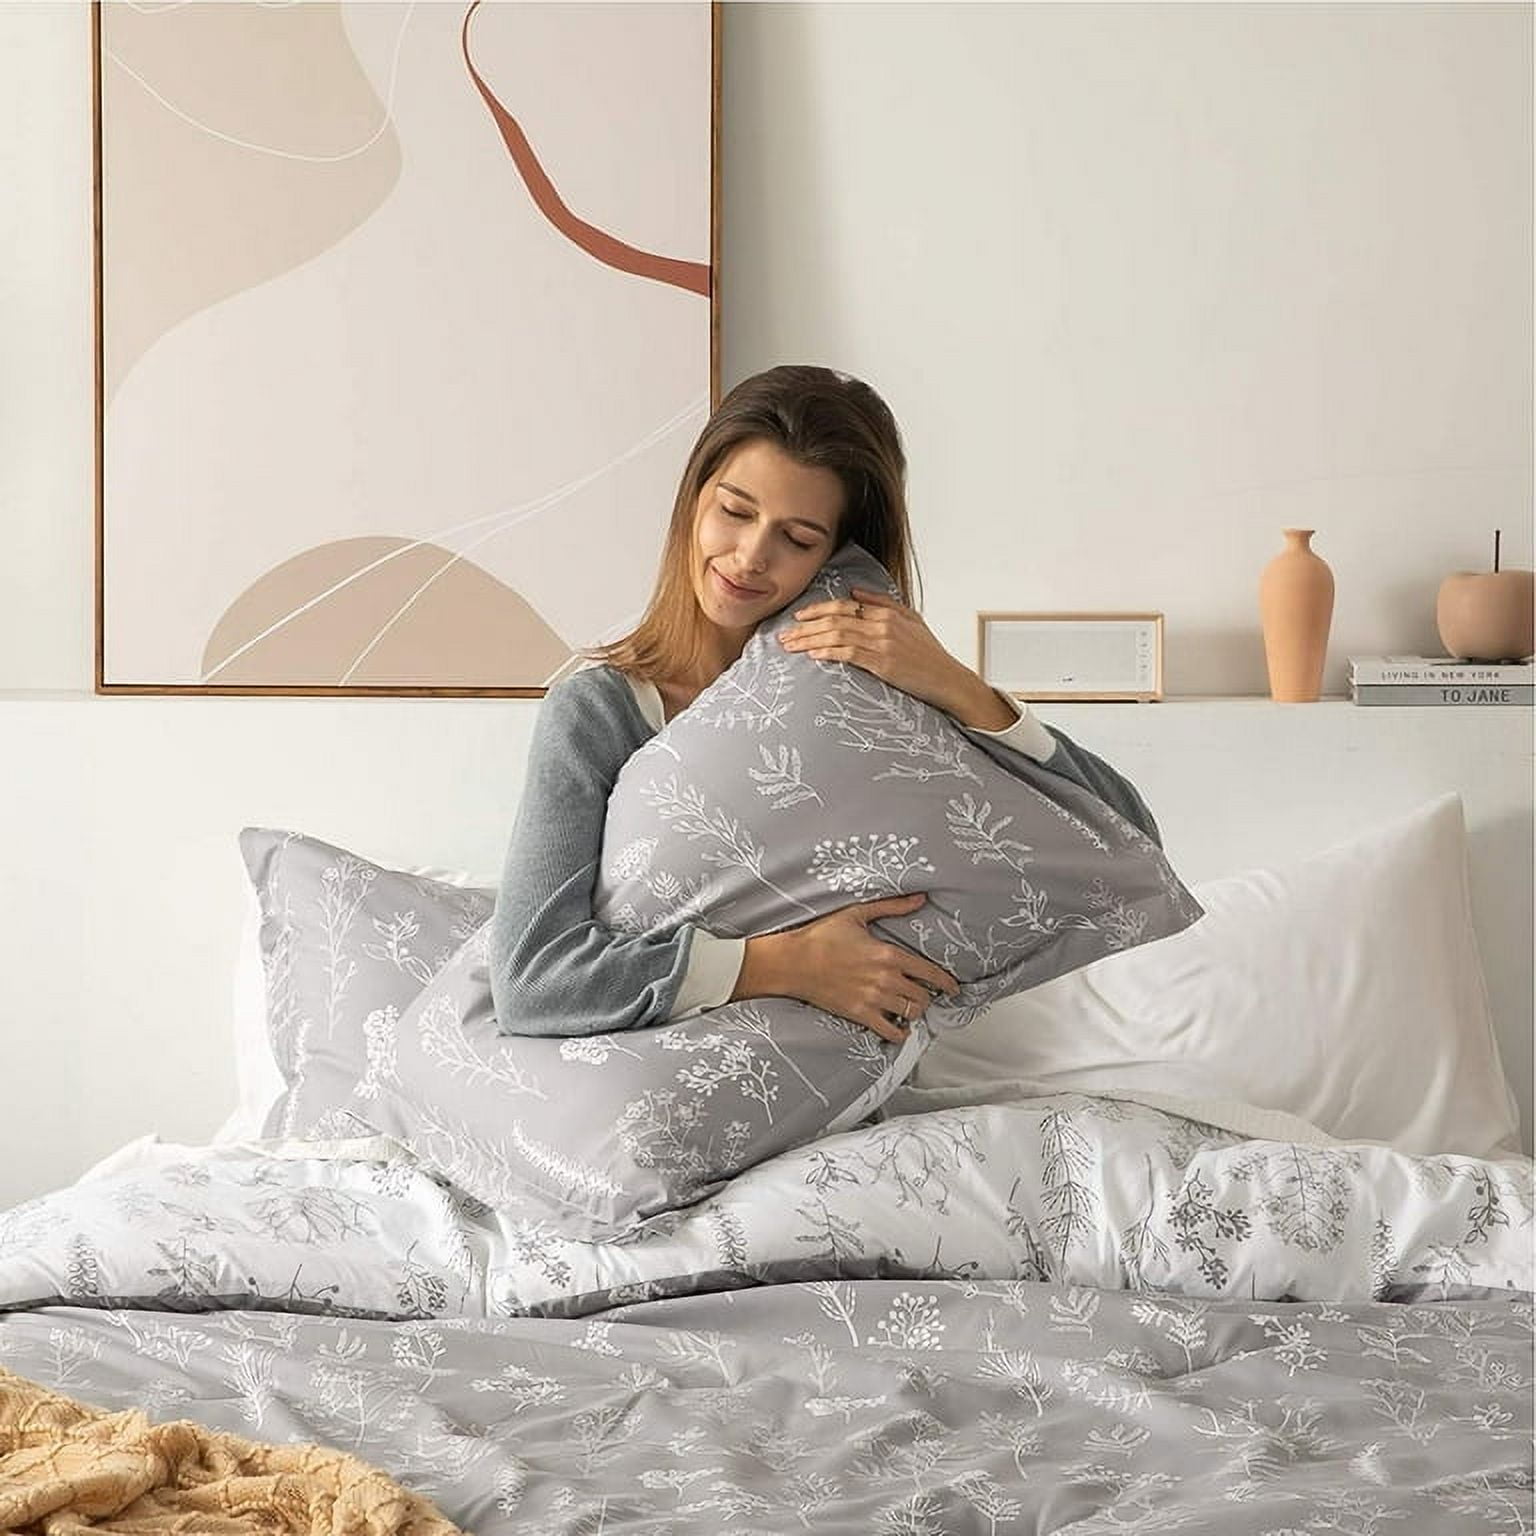 Up To 80% Off on Reversible Patterned Comforte